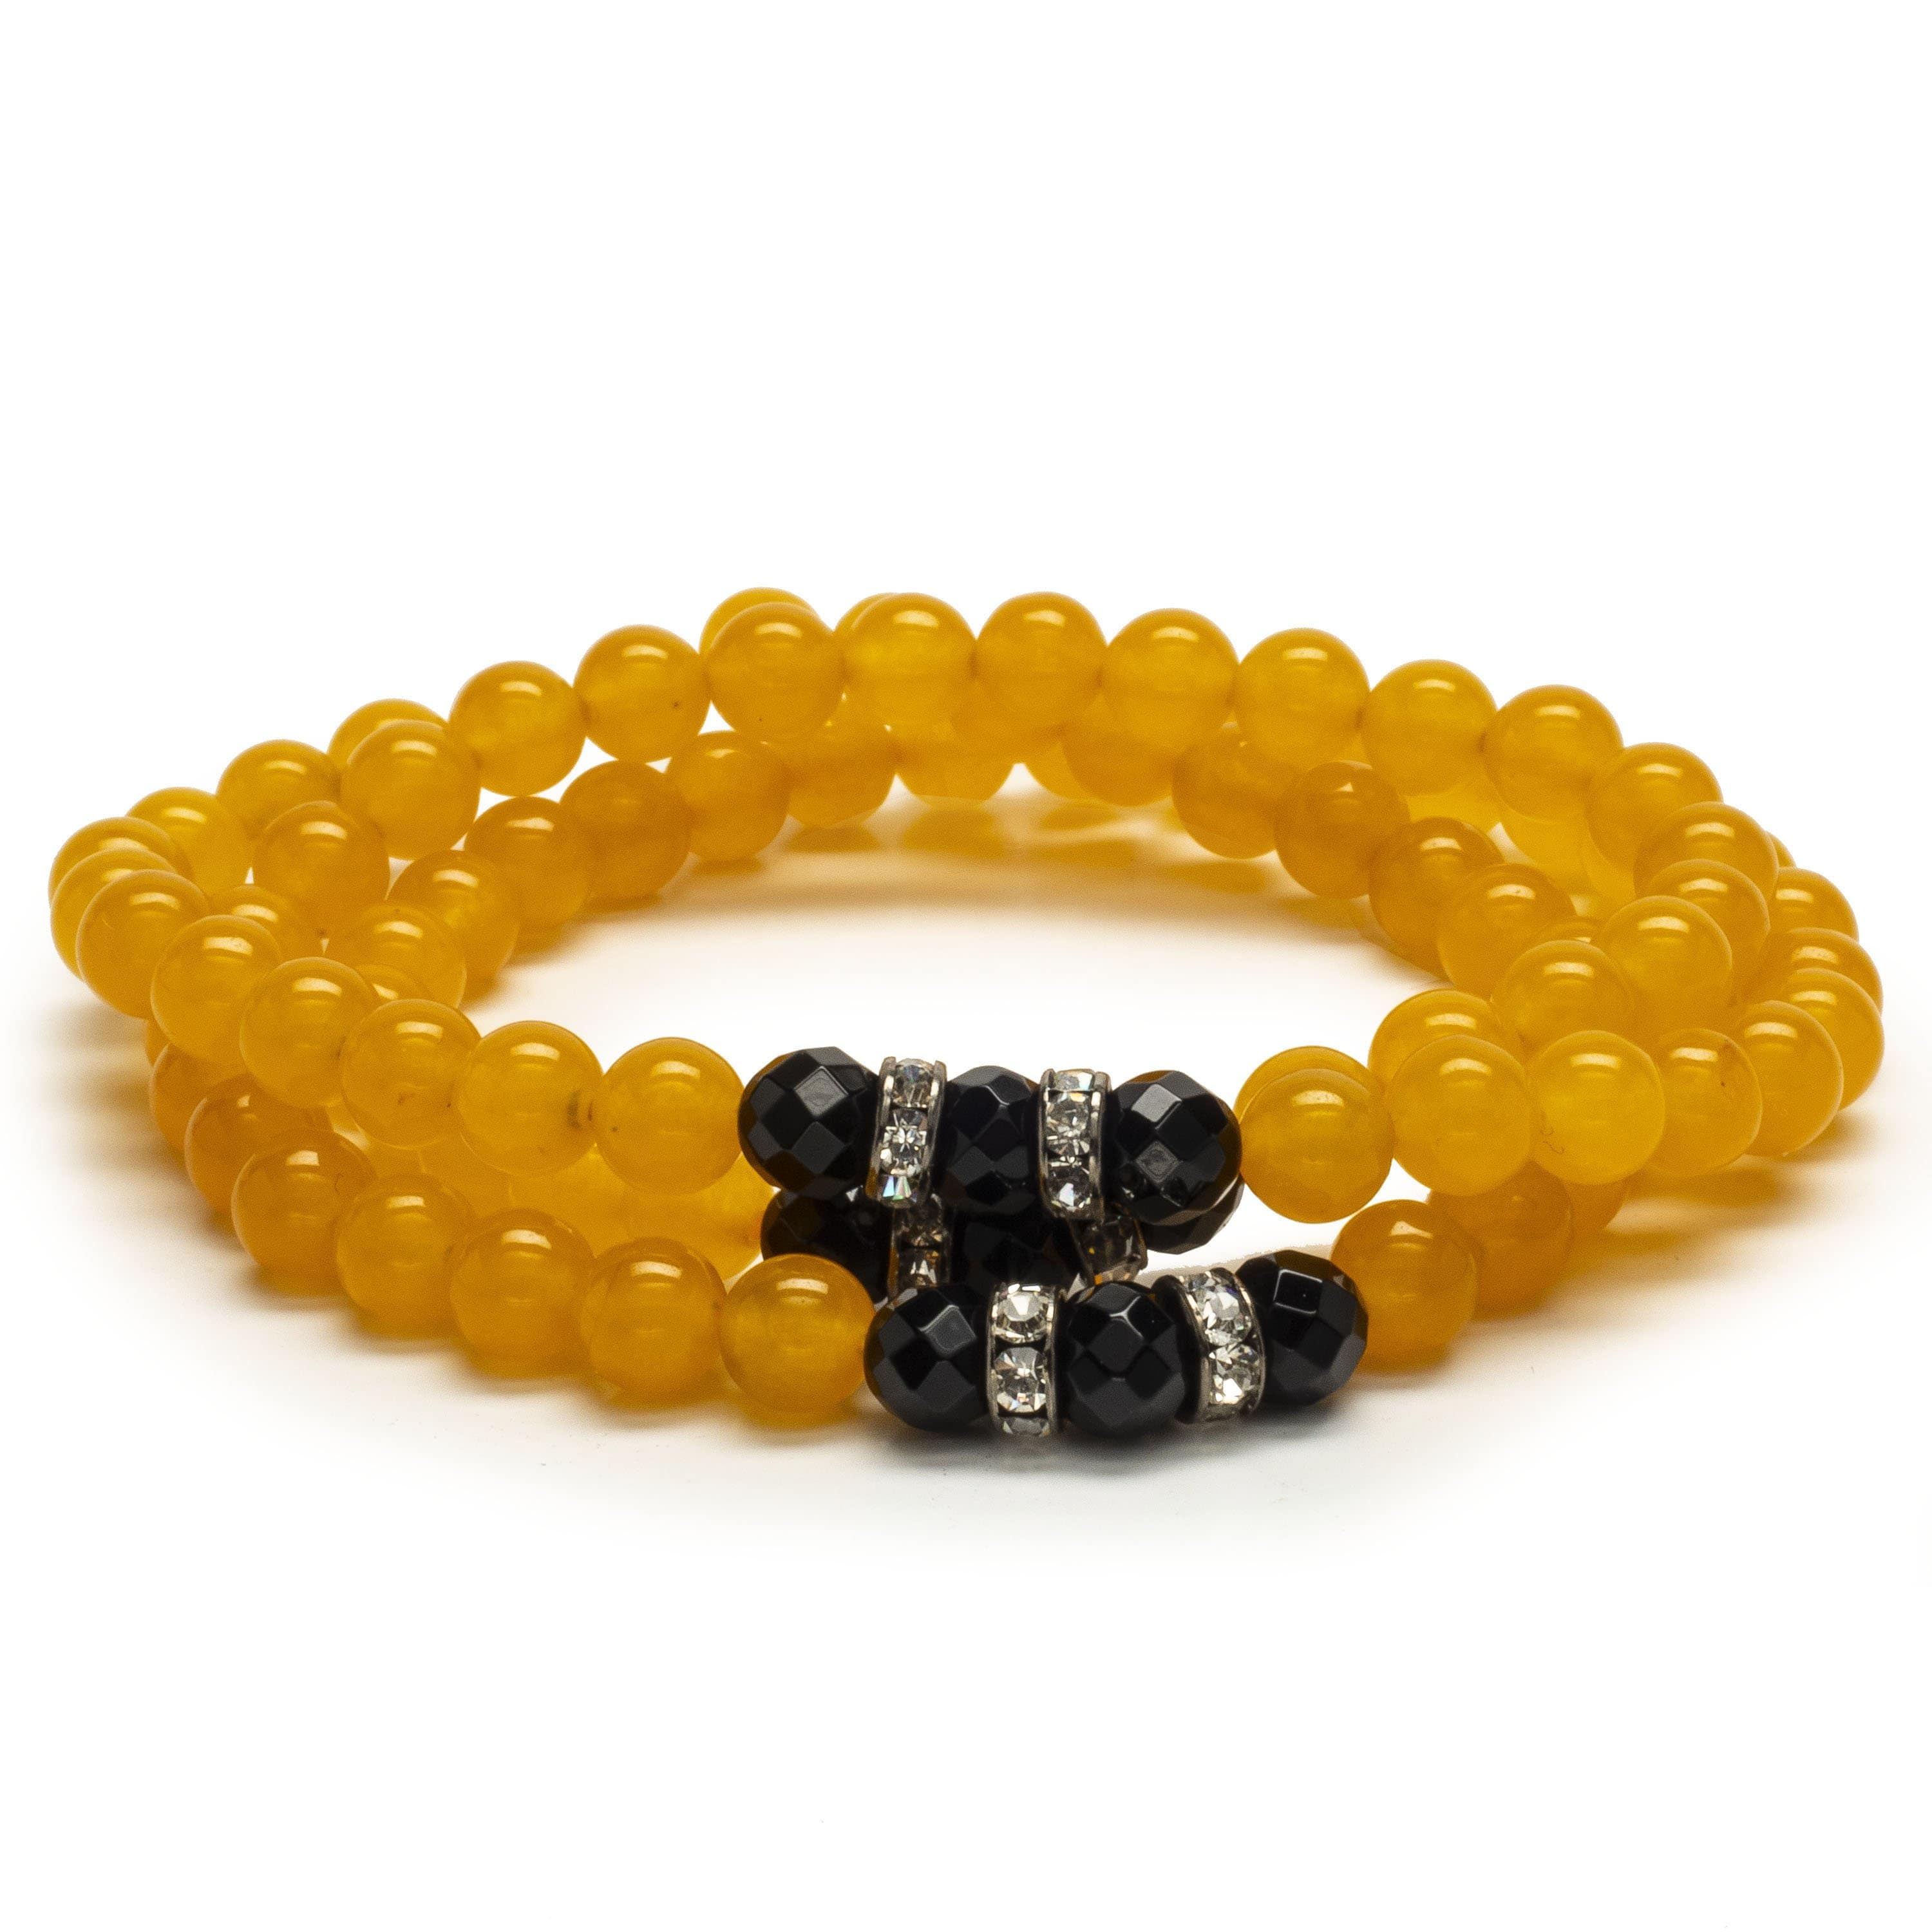 Kalifano Gemstone Bracelets Yellow Agate 6mm Beads with Black Agate and Silver Crystal Accent Beads Triple Wrap Elastic Gemstone Bracelet WHITE-BGI3-065